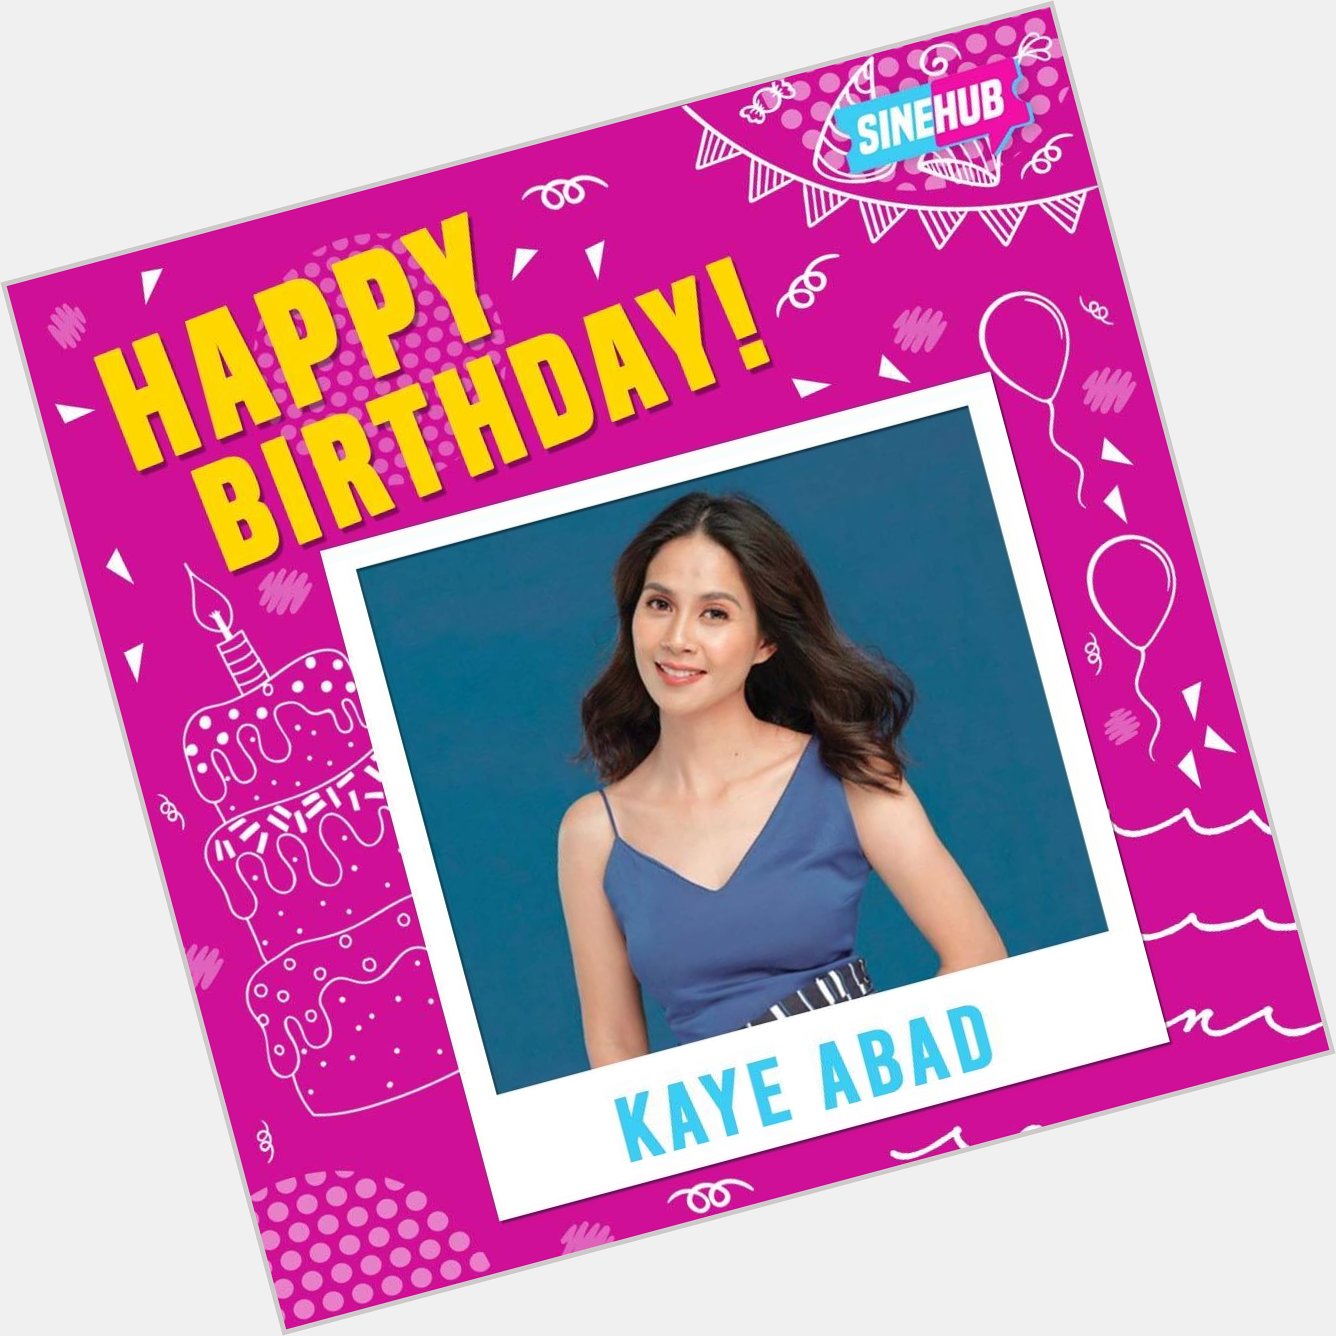 Looking younger than ever! Happy birthday, Kaye Abad!   